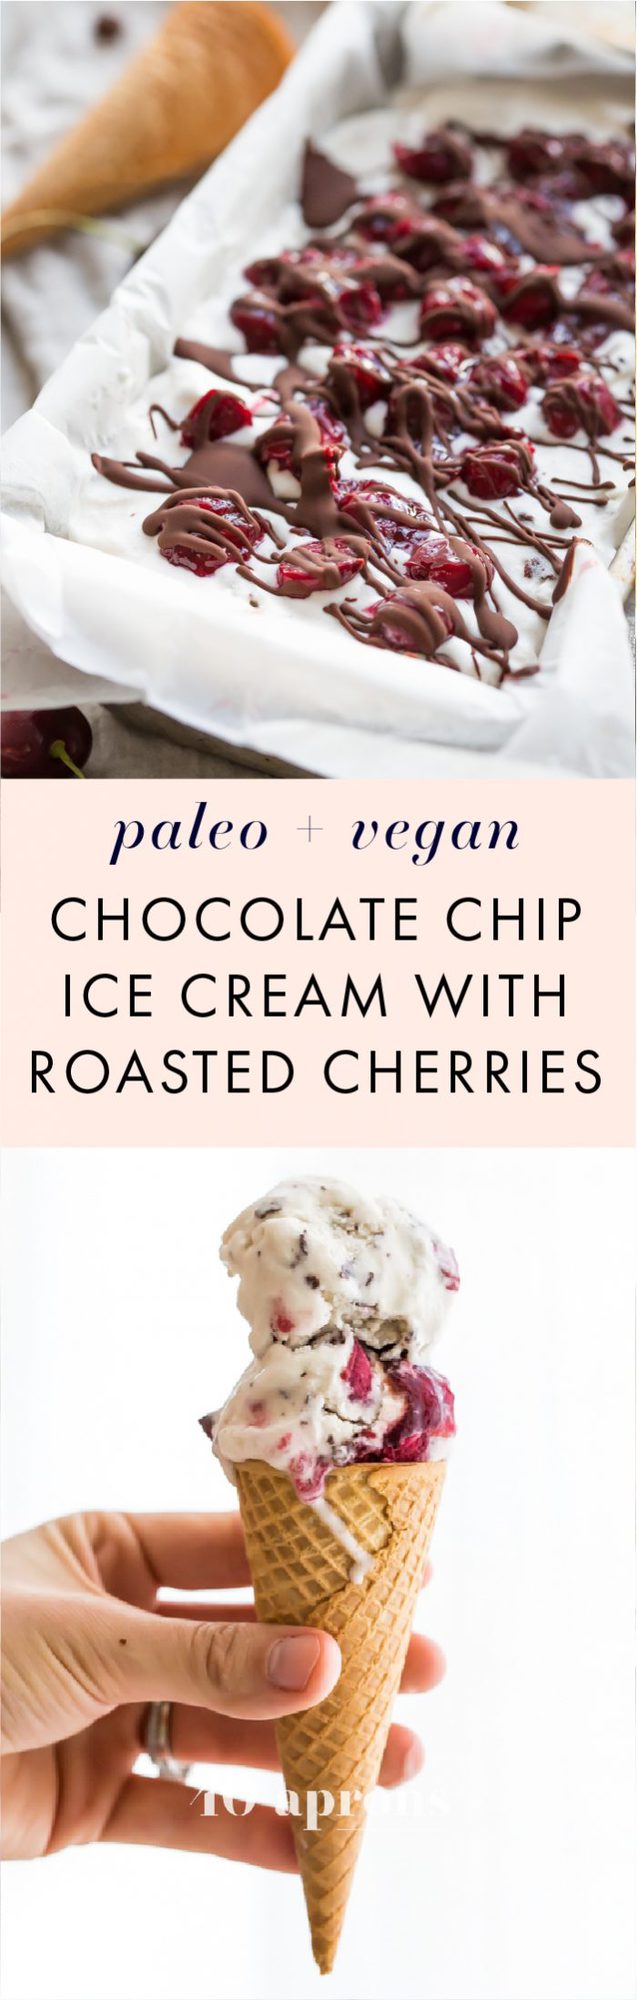 This paleo chocolate chip ice cream with roasted cherries is easy, rich, a bit tart, and totally delicious. With a vegan chocolate chip ice cream base, inspired by Italian stracciatella, it layers heady, roasted cherries, producing the perfect creamy, tart, chocolatey combination. Such a fantastic paleo ice cream recipe (or vegan ice cream recipe, if you prefer!). You absolutely must try this paleo chocolate chip ice cream with roasted cherries while the fruit is still in season.